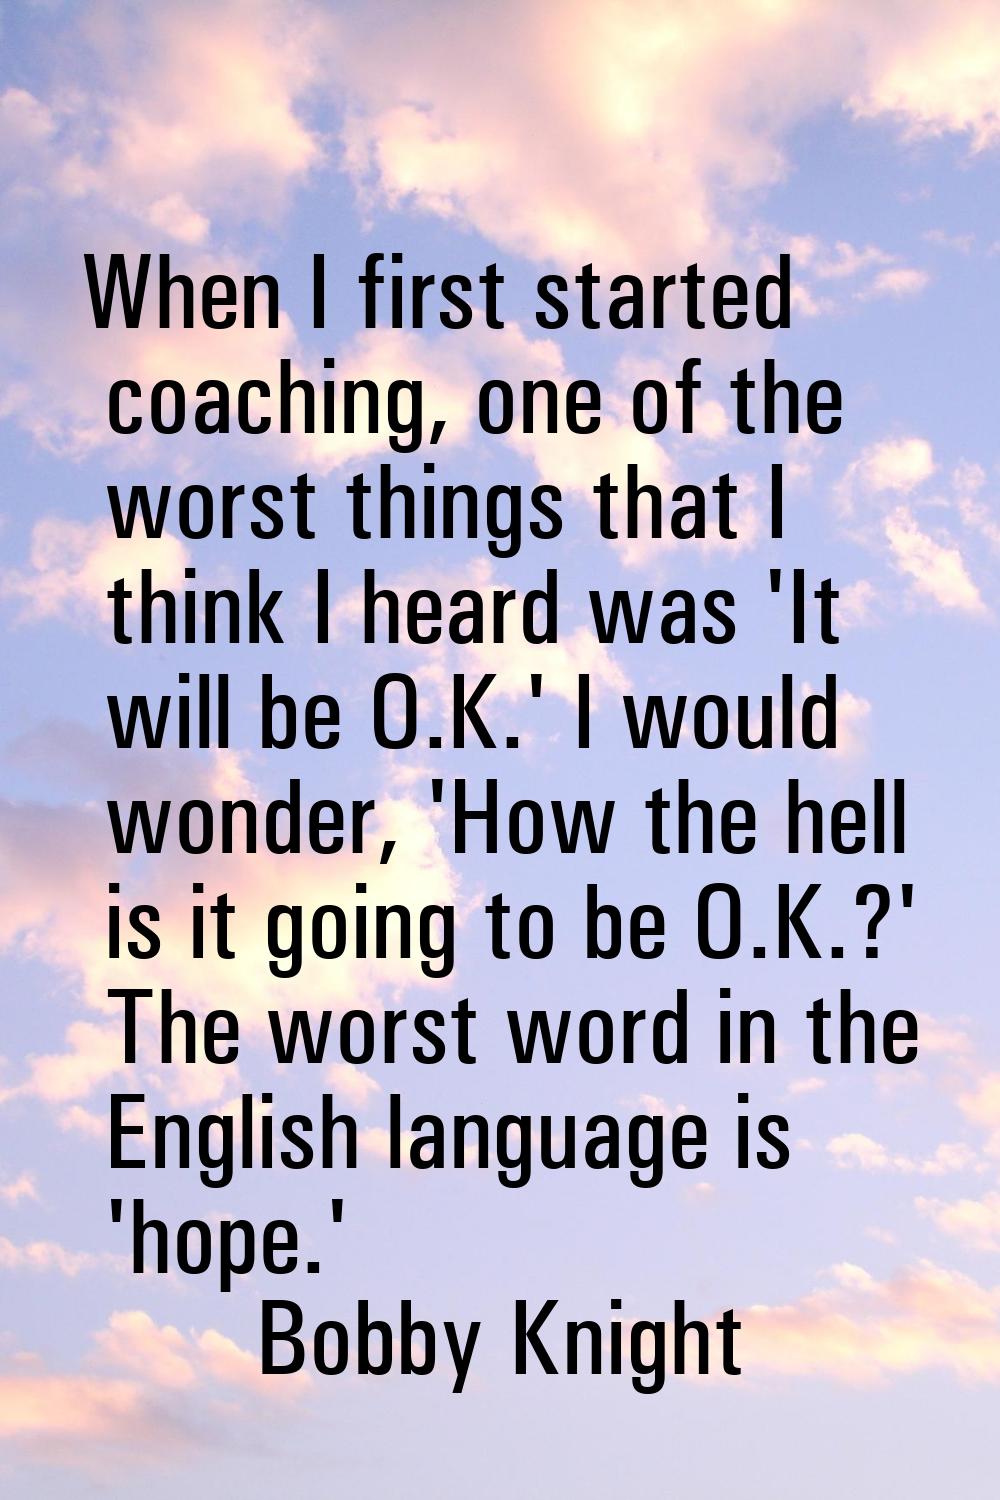 When I first started coaching, one of the worst things that I think I heard was 'It will be O.K.' I